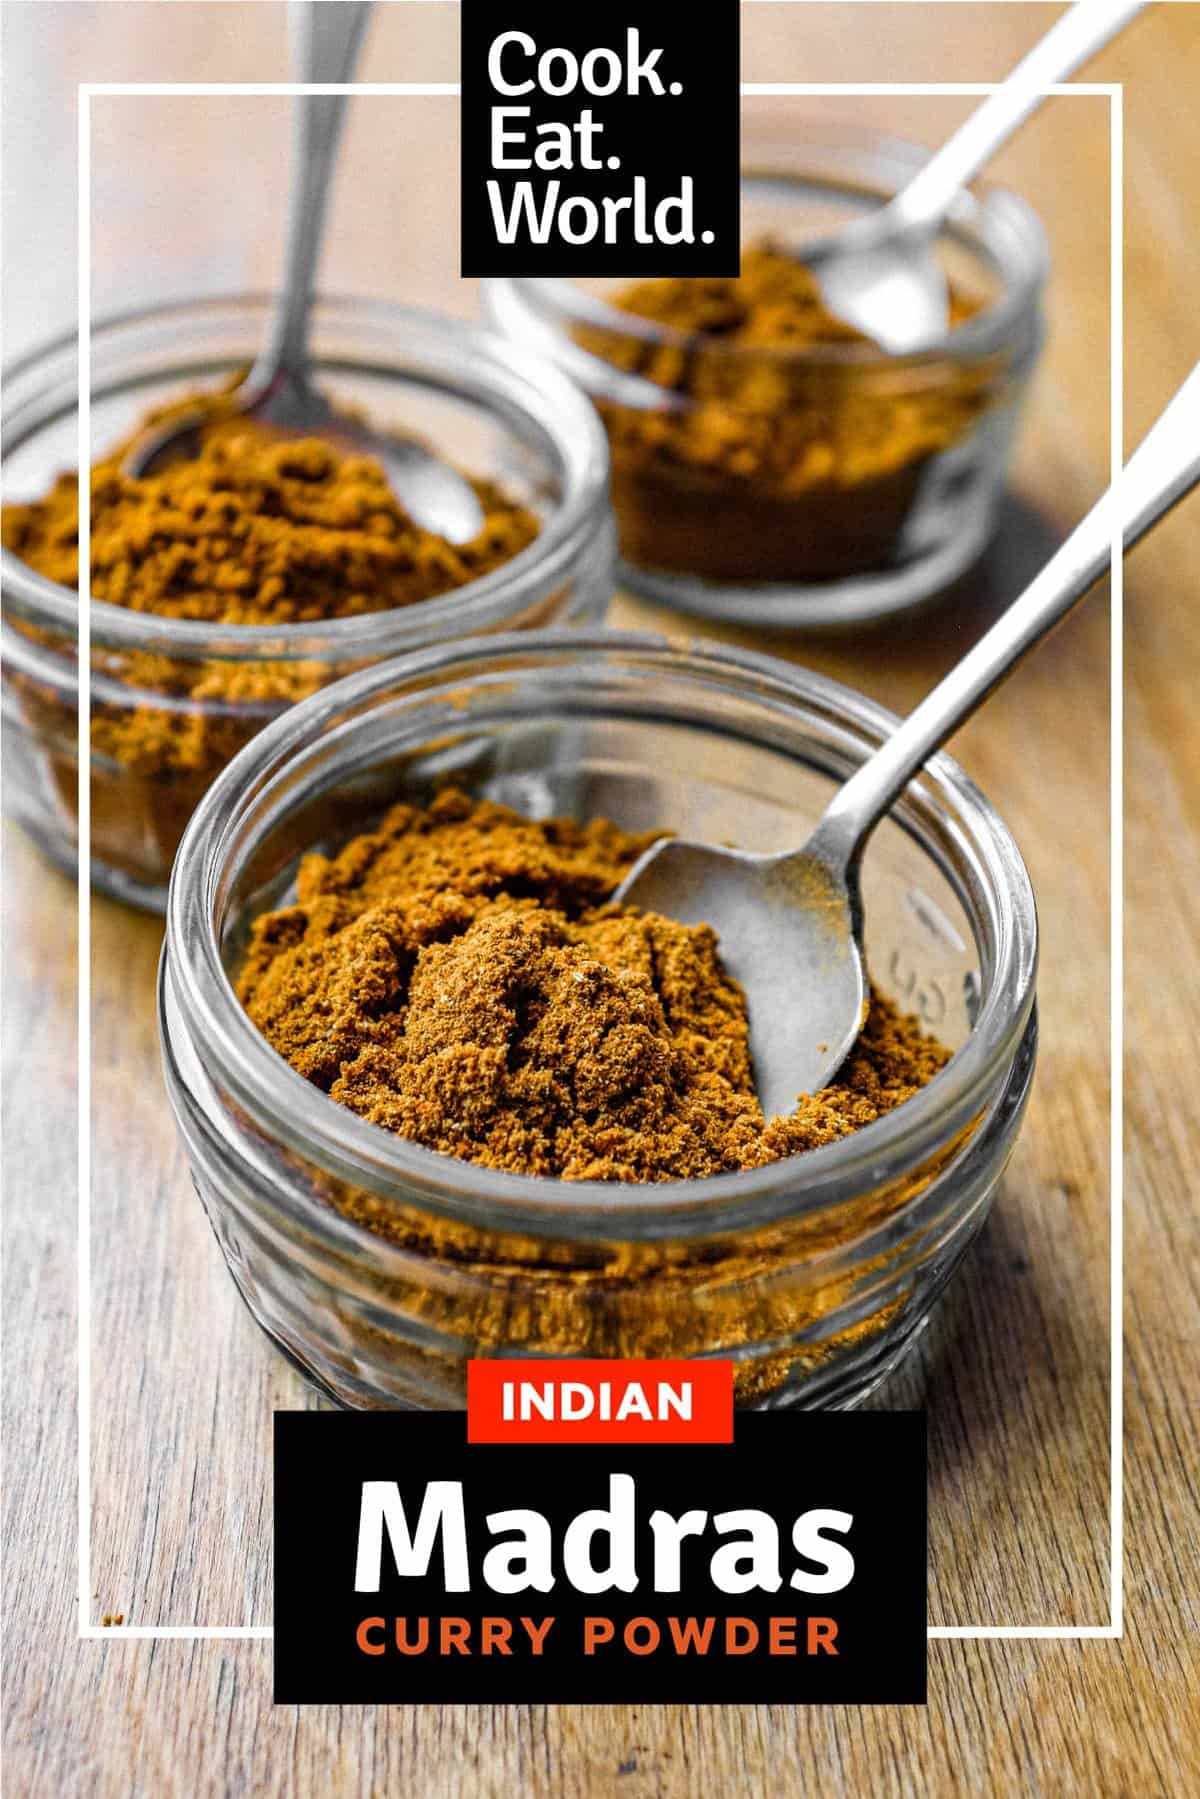 Three small jars of Madras curry powder with spoons on a wooden surface